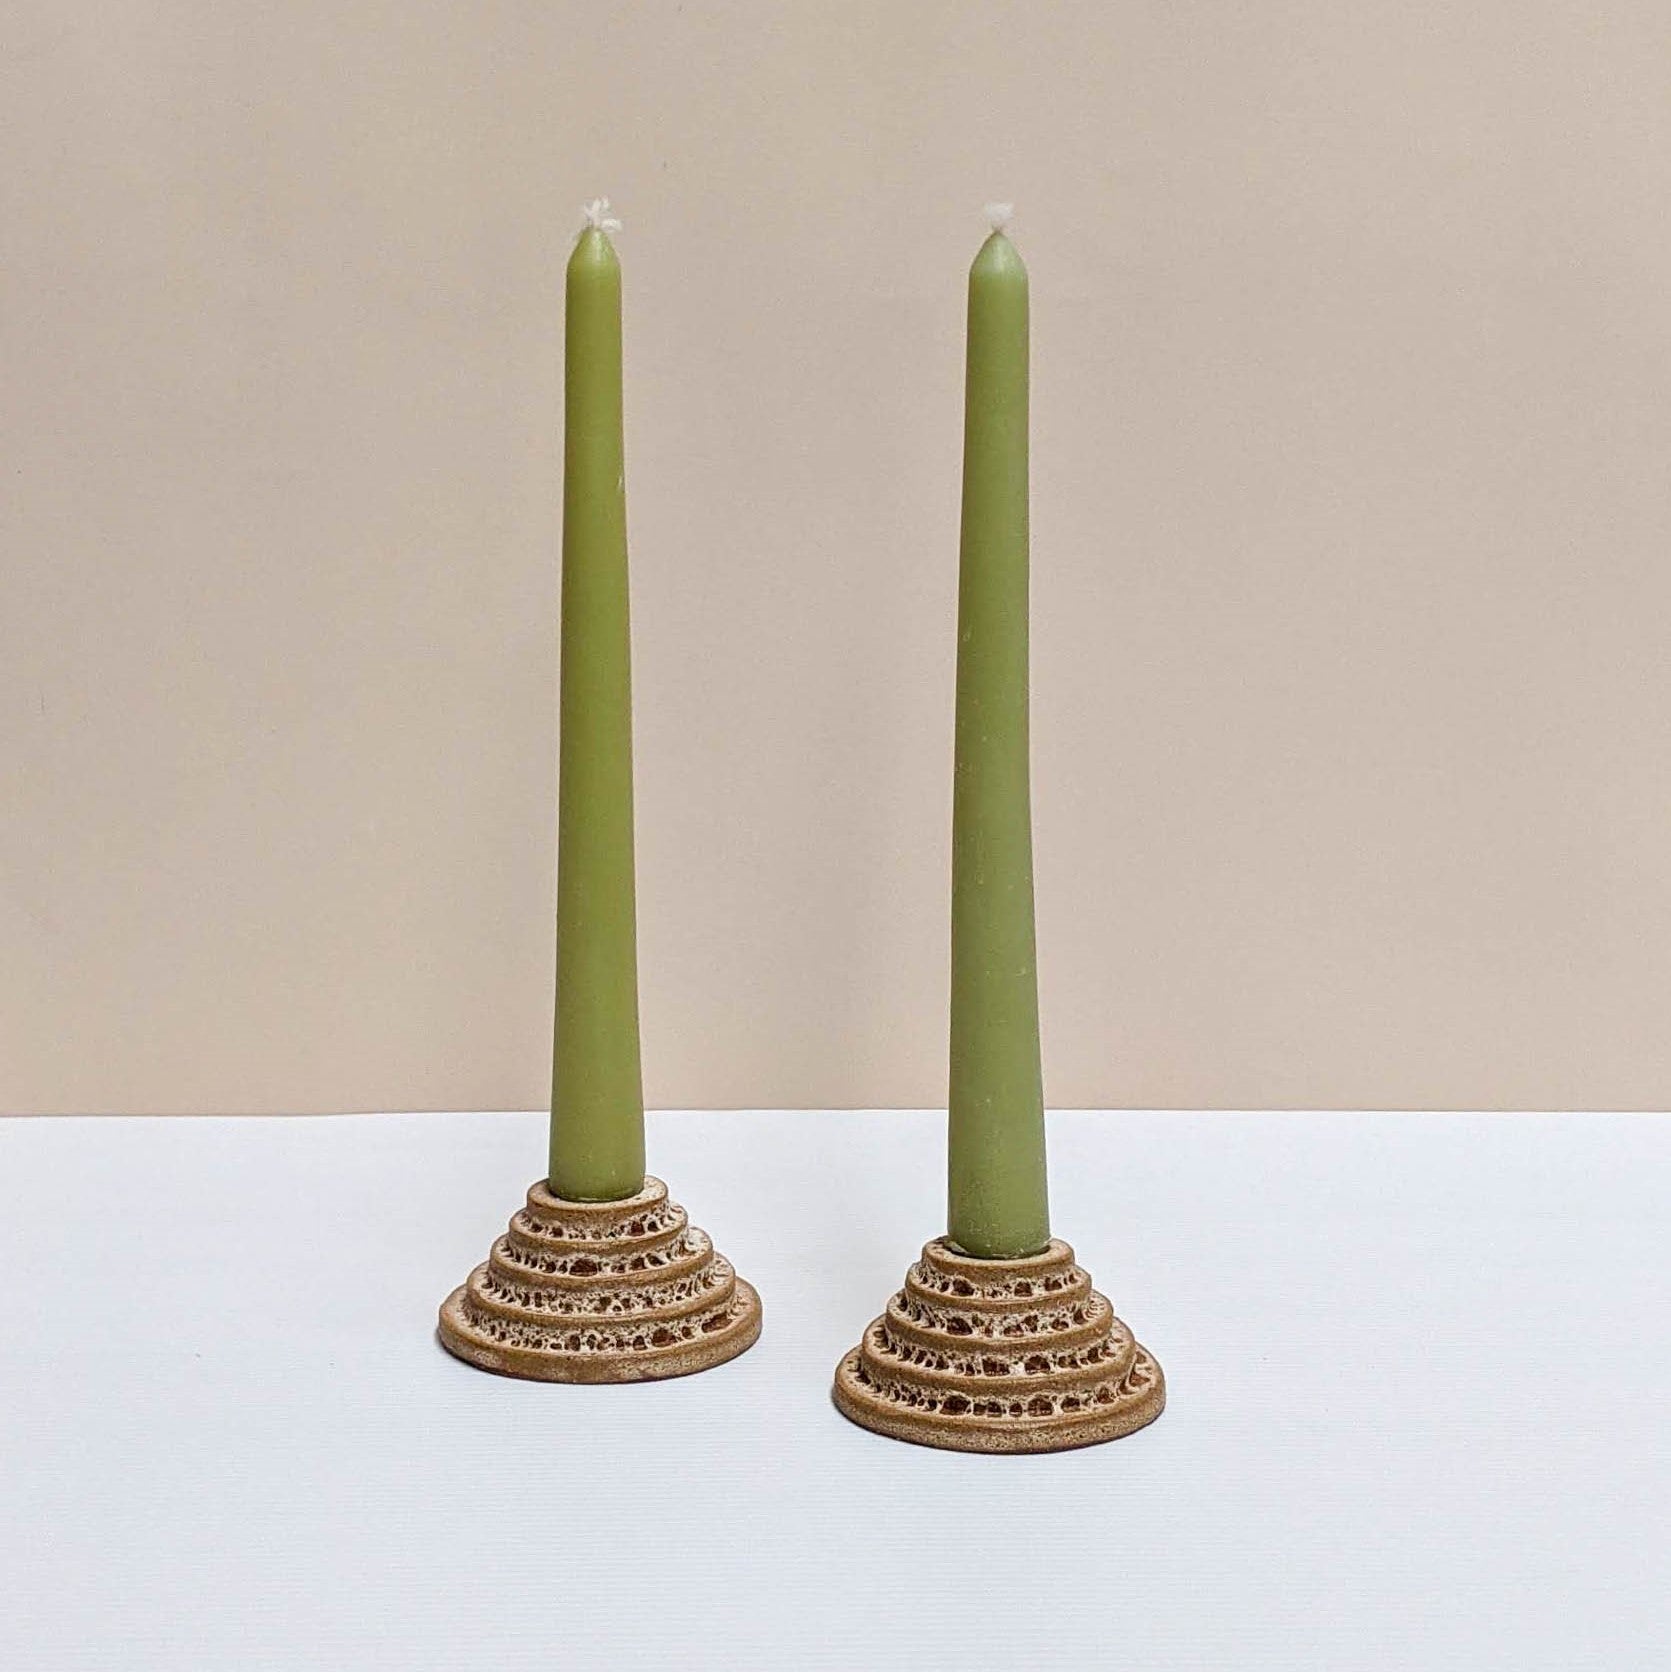 Two circular ceramic candle holders in rust lava glaze.  Each candle features steps leading up to the candle. Both of the candle holders have green unlit candles and are sitting on a white and cream backdrop. 